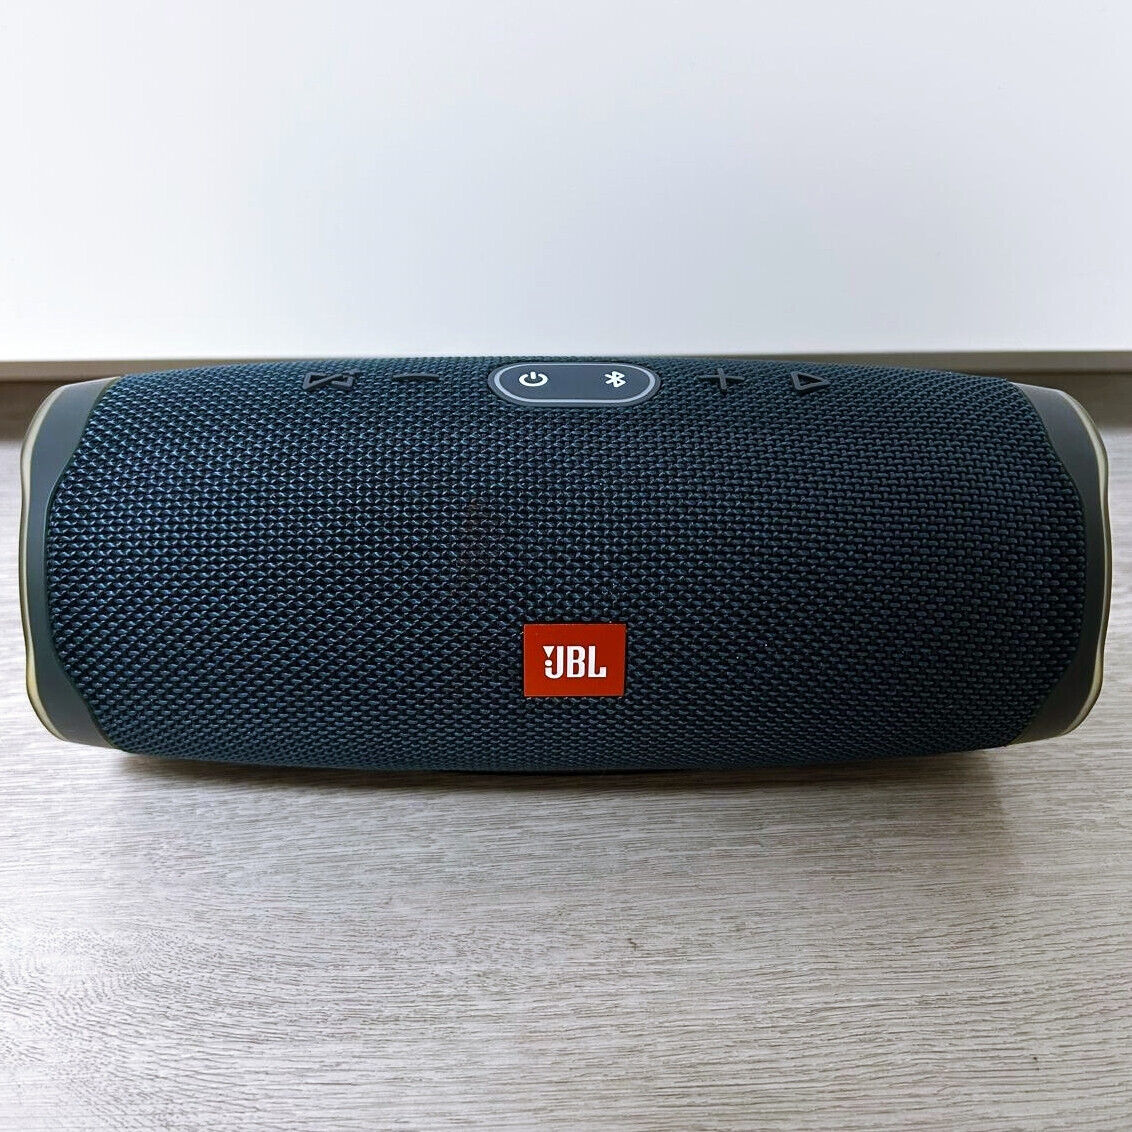 JBL Charge 4 Waterproof Portable Bluetooth Speaker 20-Hour Playing Time Blue - $87.90